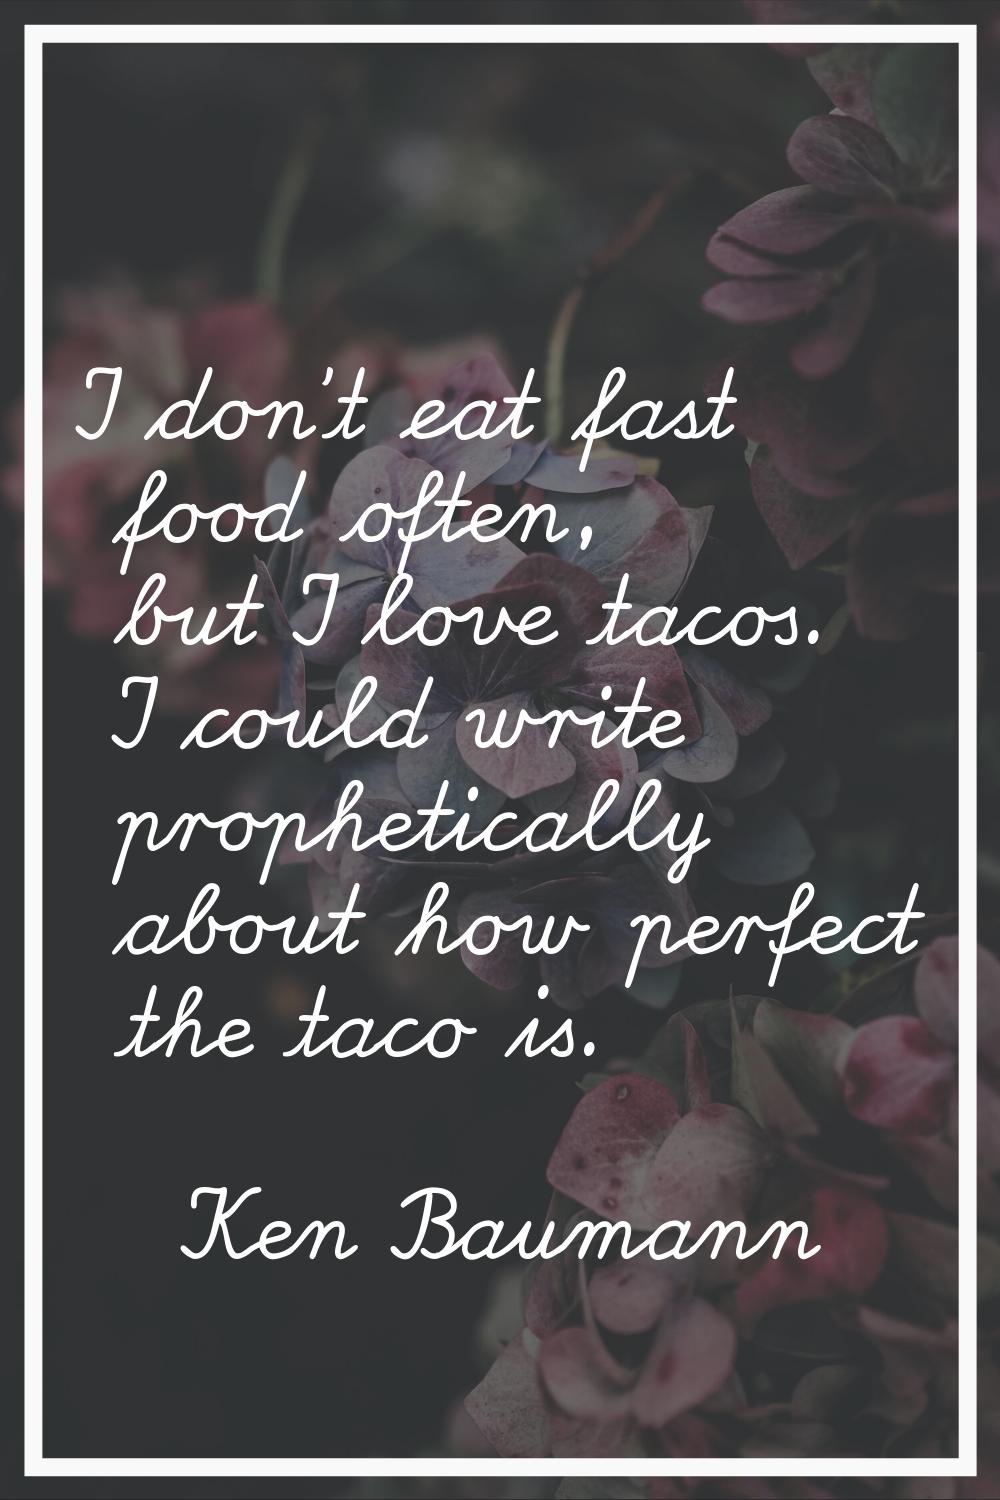 I don't eat fast food often, but I love tacos. I could write prophetically about how perfect the ta